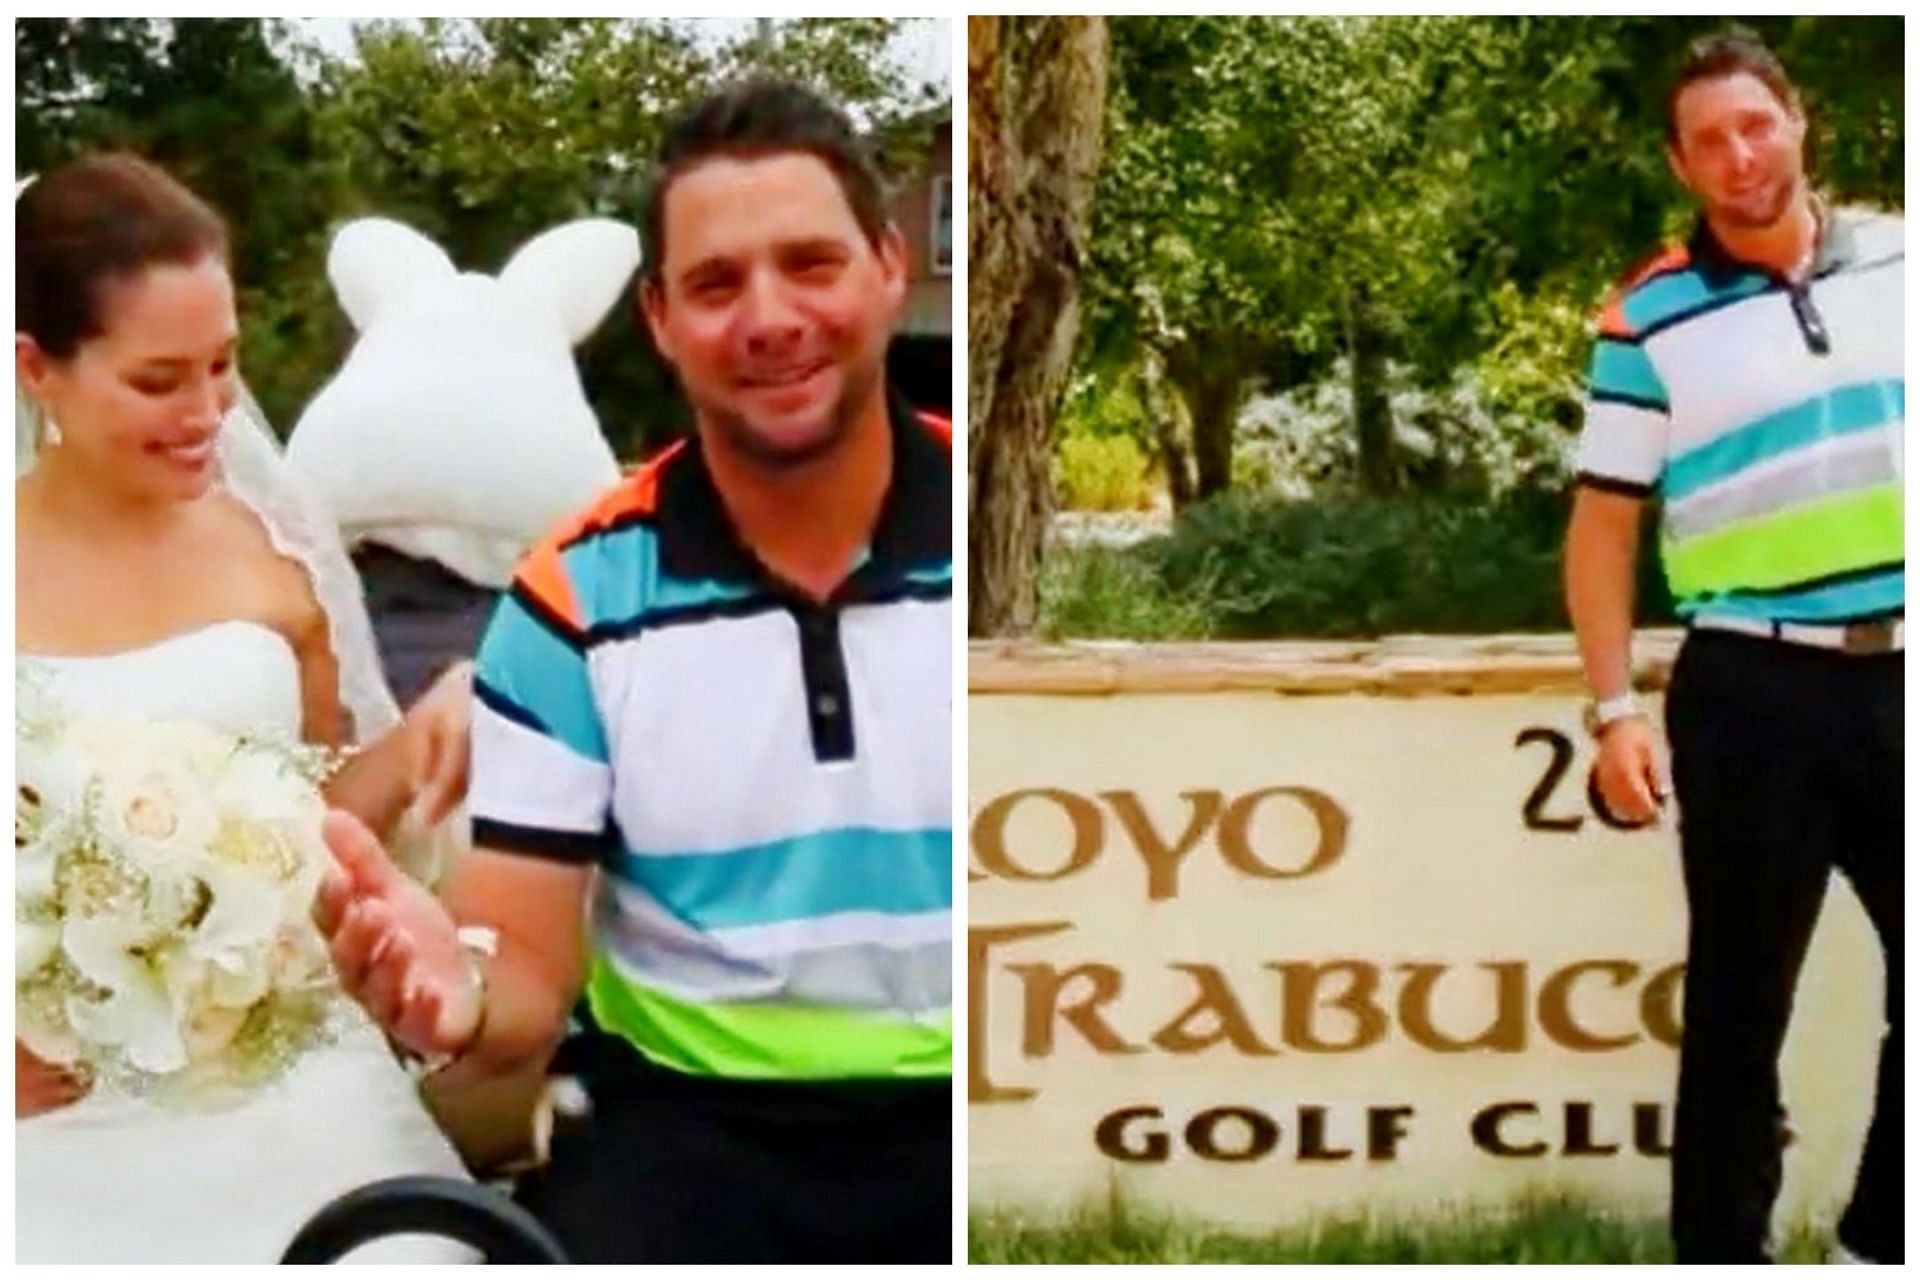 Michael Block featured in a hilarious ad for his golf club Arroyo Trabuco Golf Club